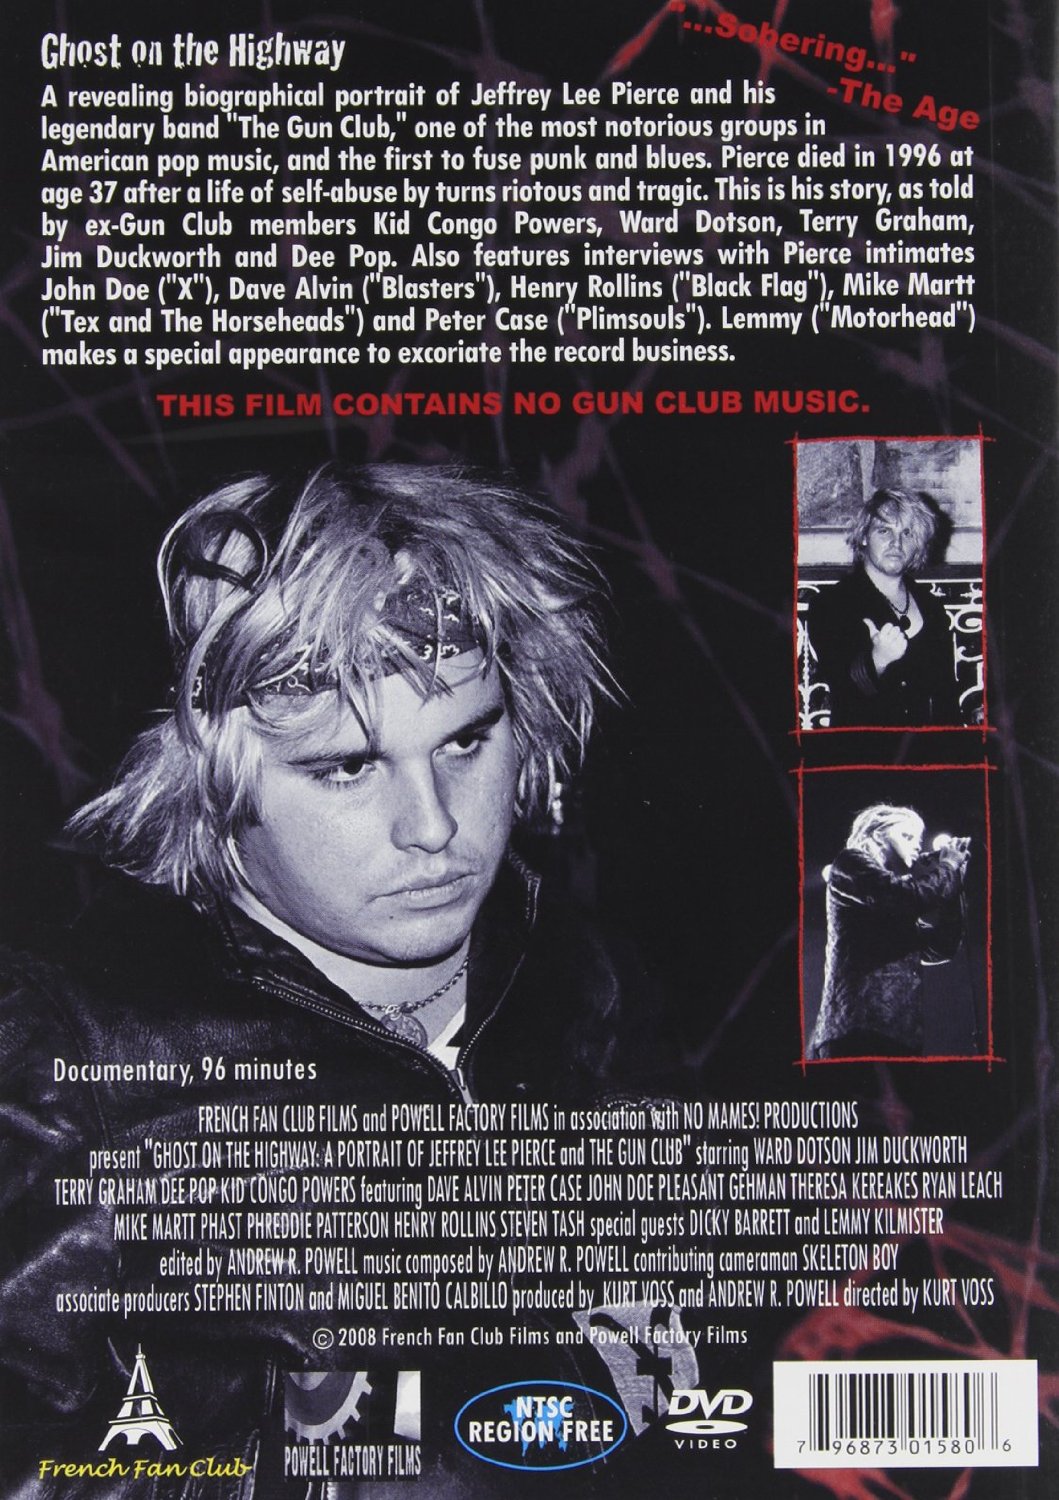 Ghost on the Highway: A Portrait of Jeffrey Lee Pierce and the Gun Club (2006) Screenshot 1